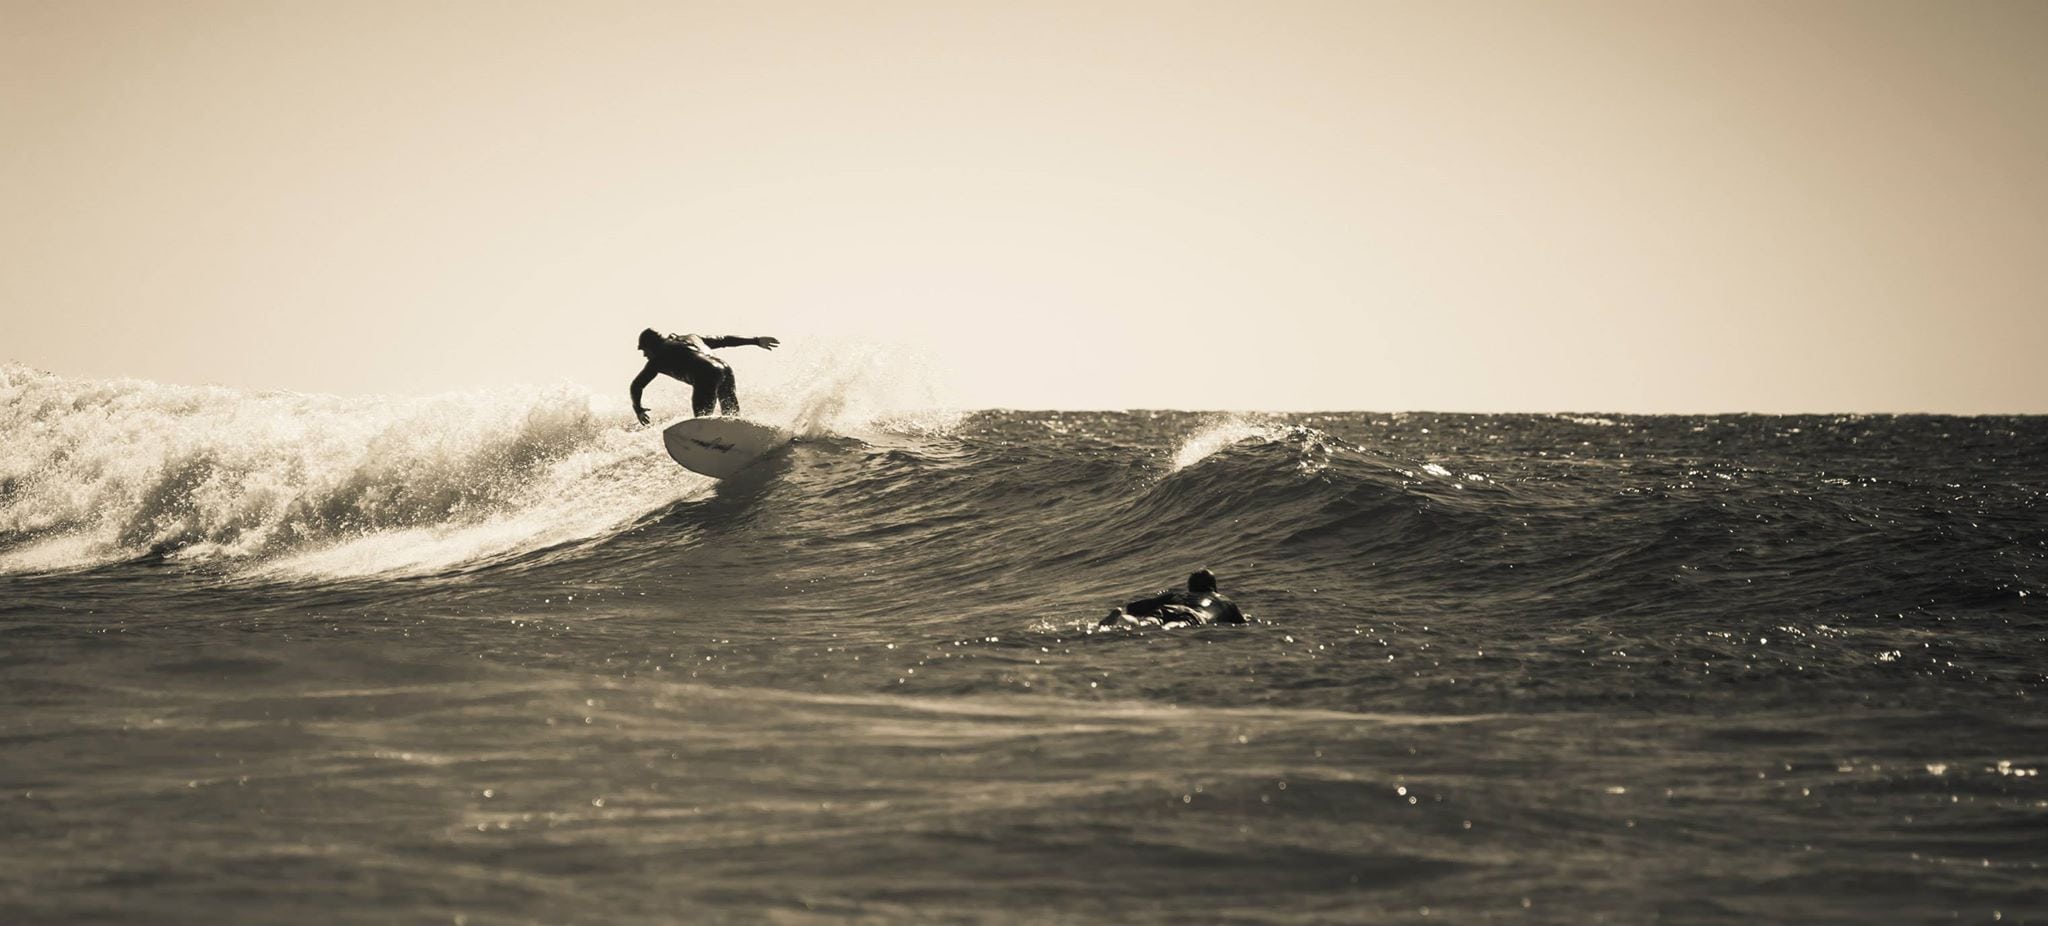 Top 5 Reasons a Baja Surf Trip is Not For You